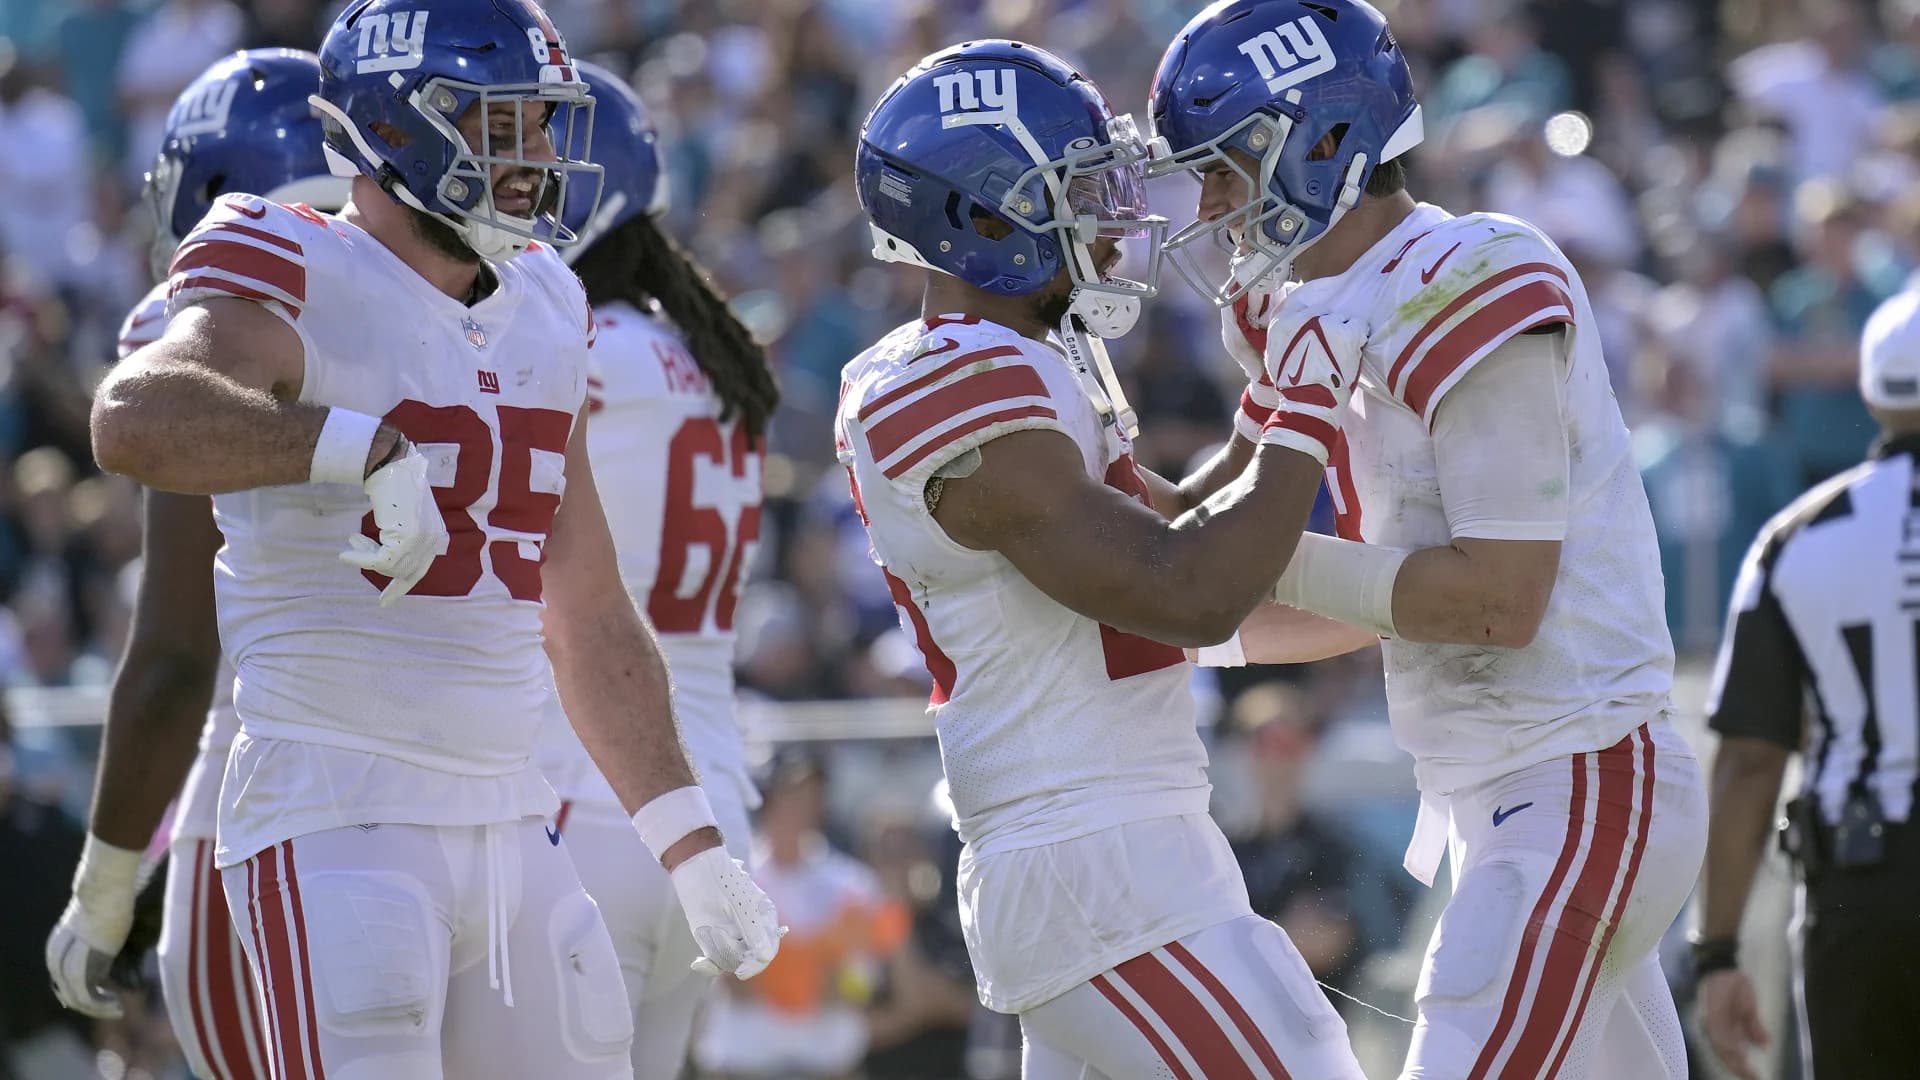 Playoffs in reach for Giants, who keep silencing doubters